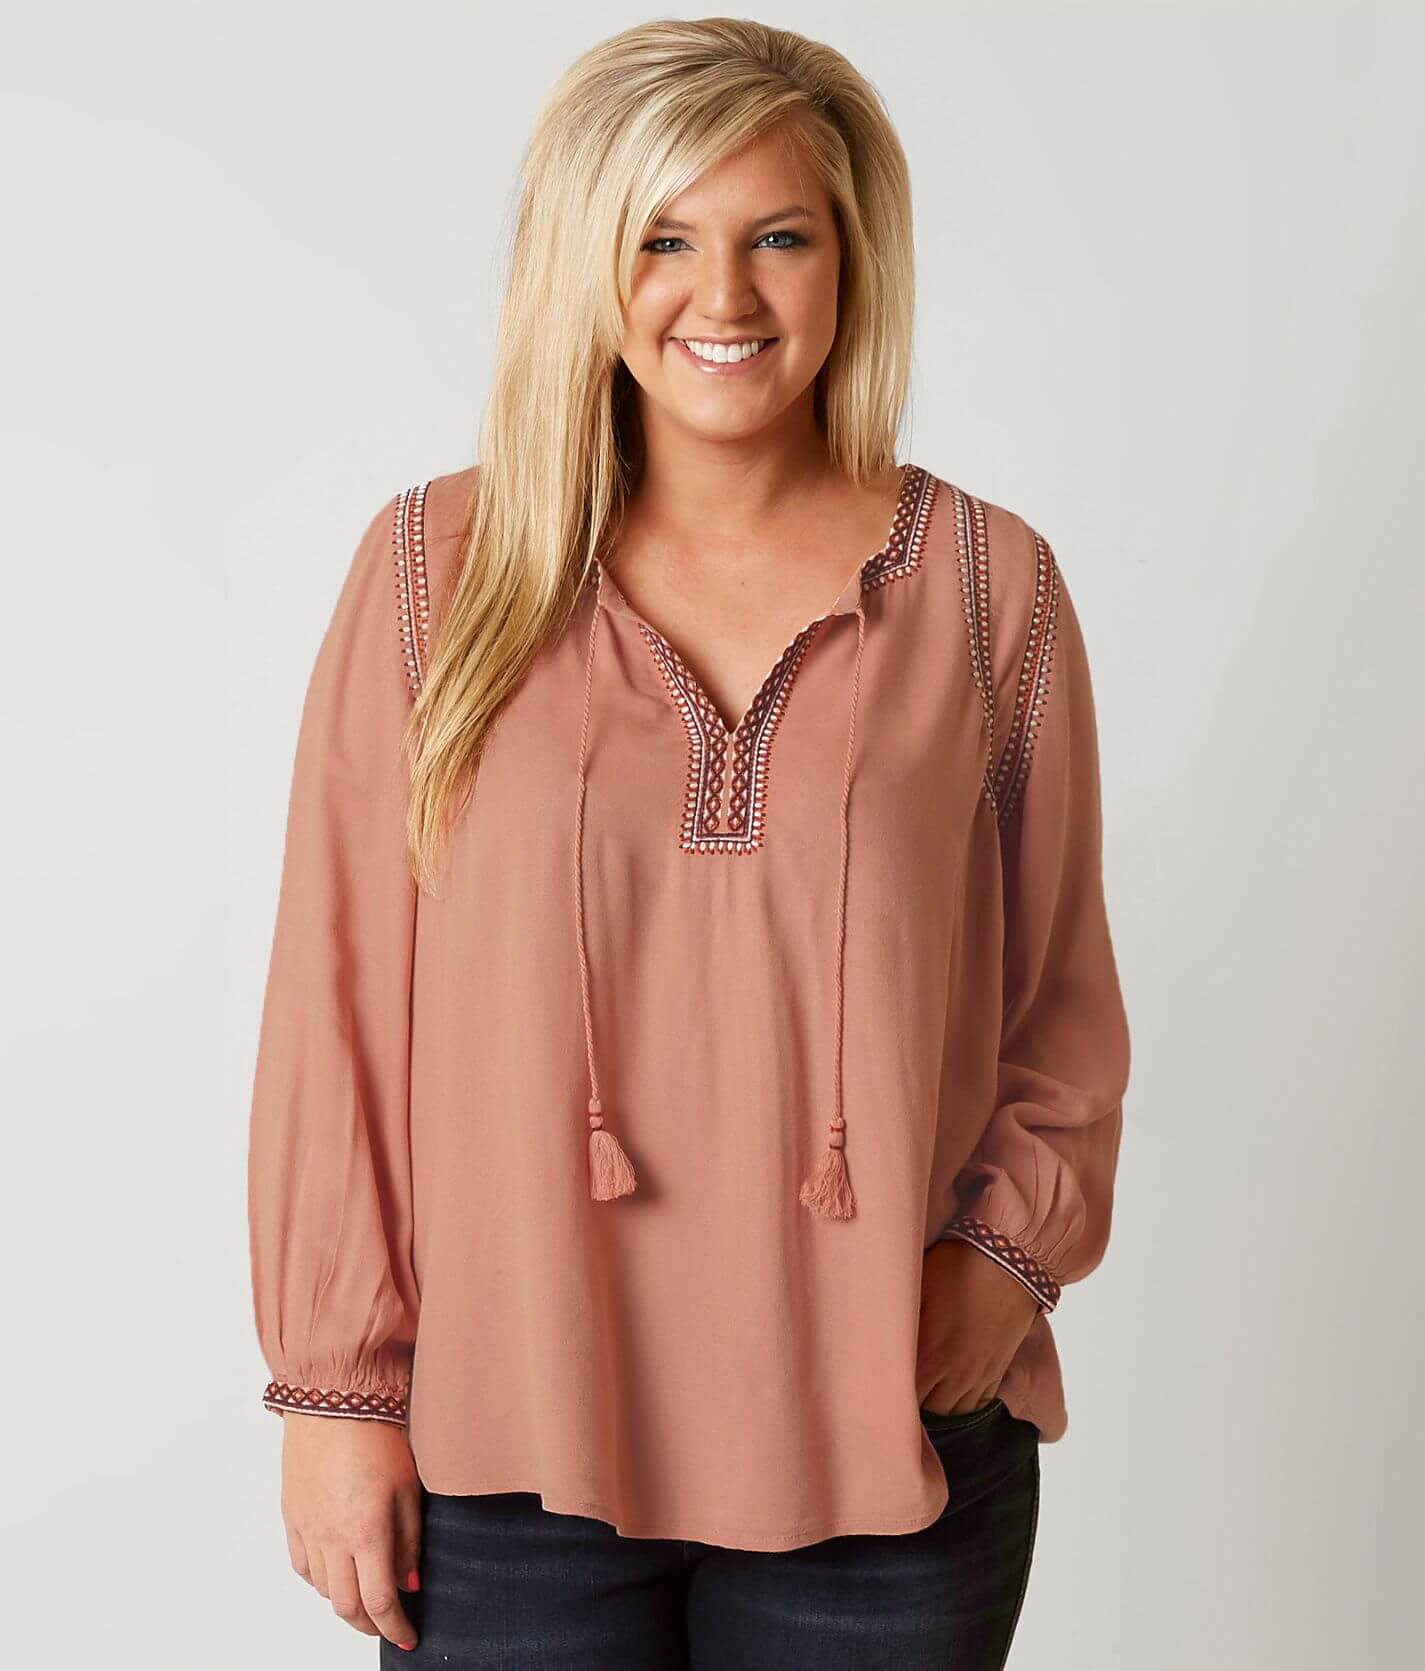 Lucky Brand Blouse - Size Only - Women's Shirts/Blouses in Misty Rose | Buckle